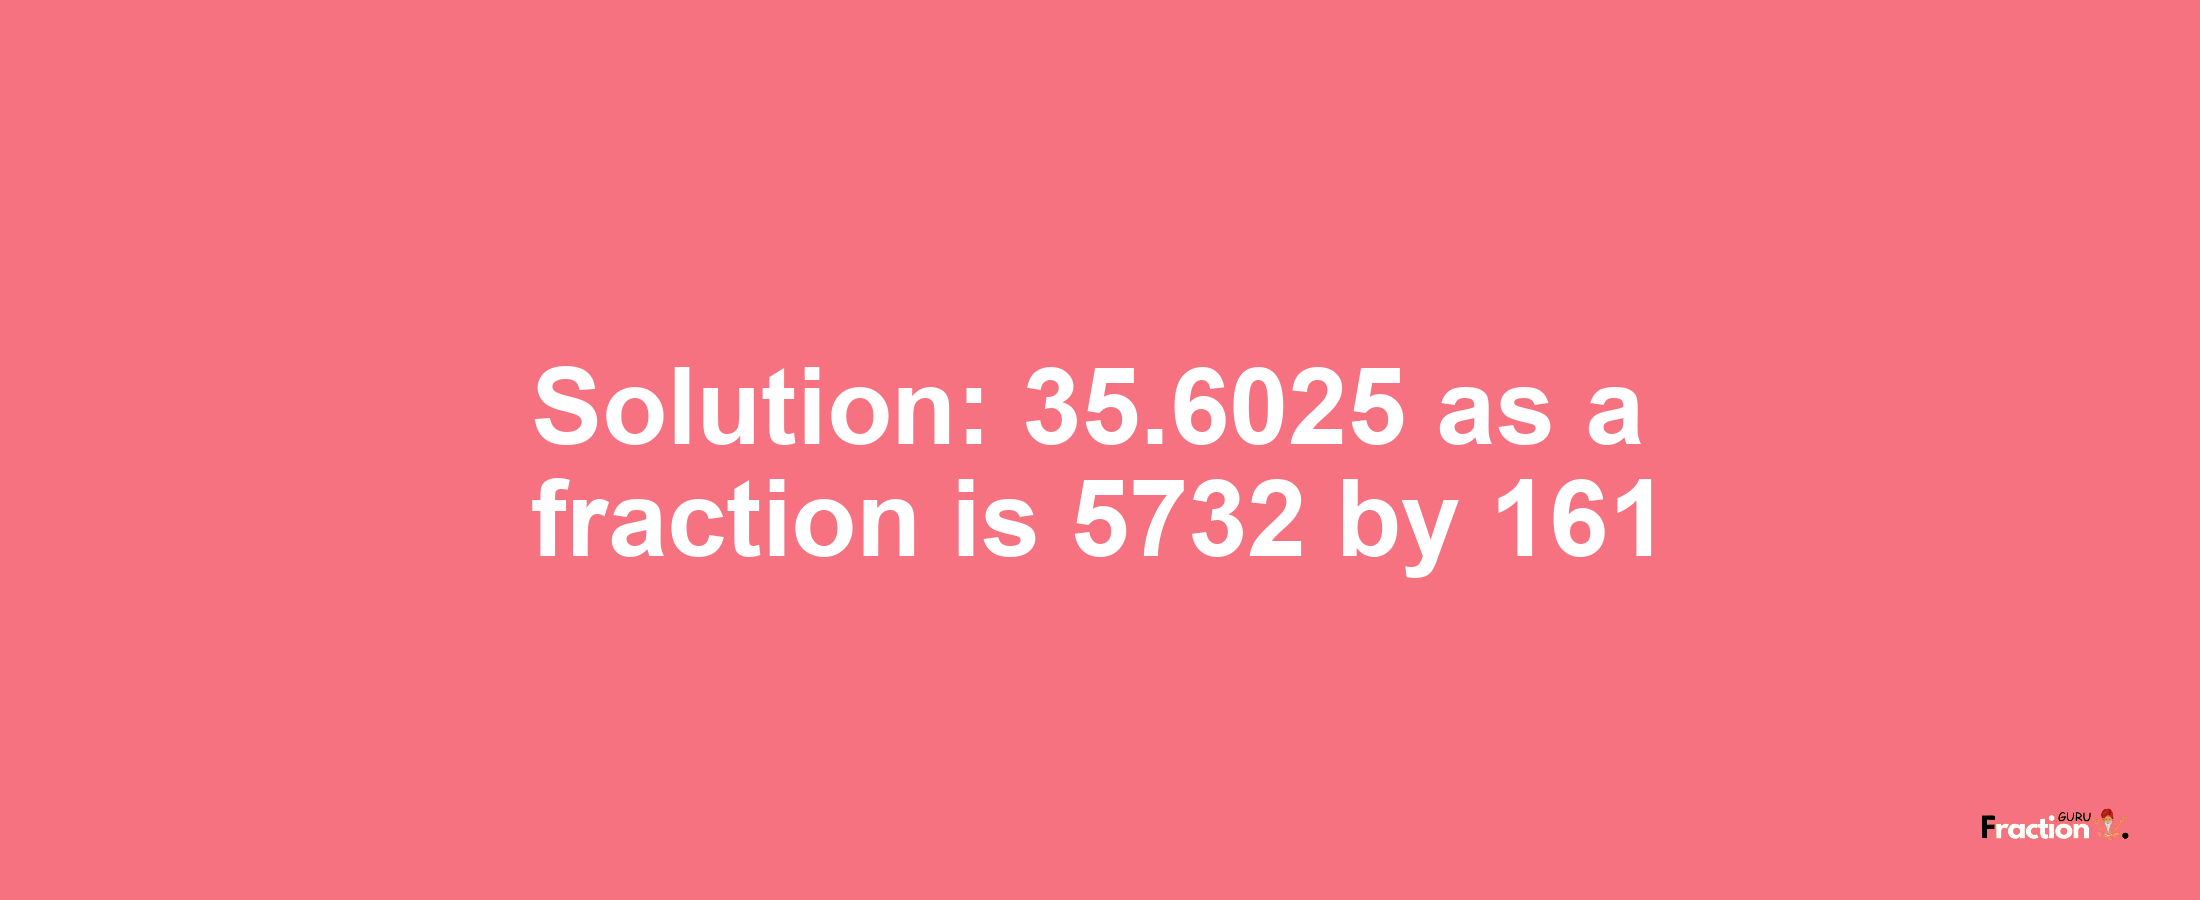 Solution:35.6025 as a fraction is 5732/161